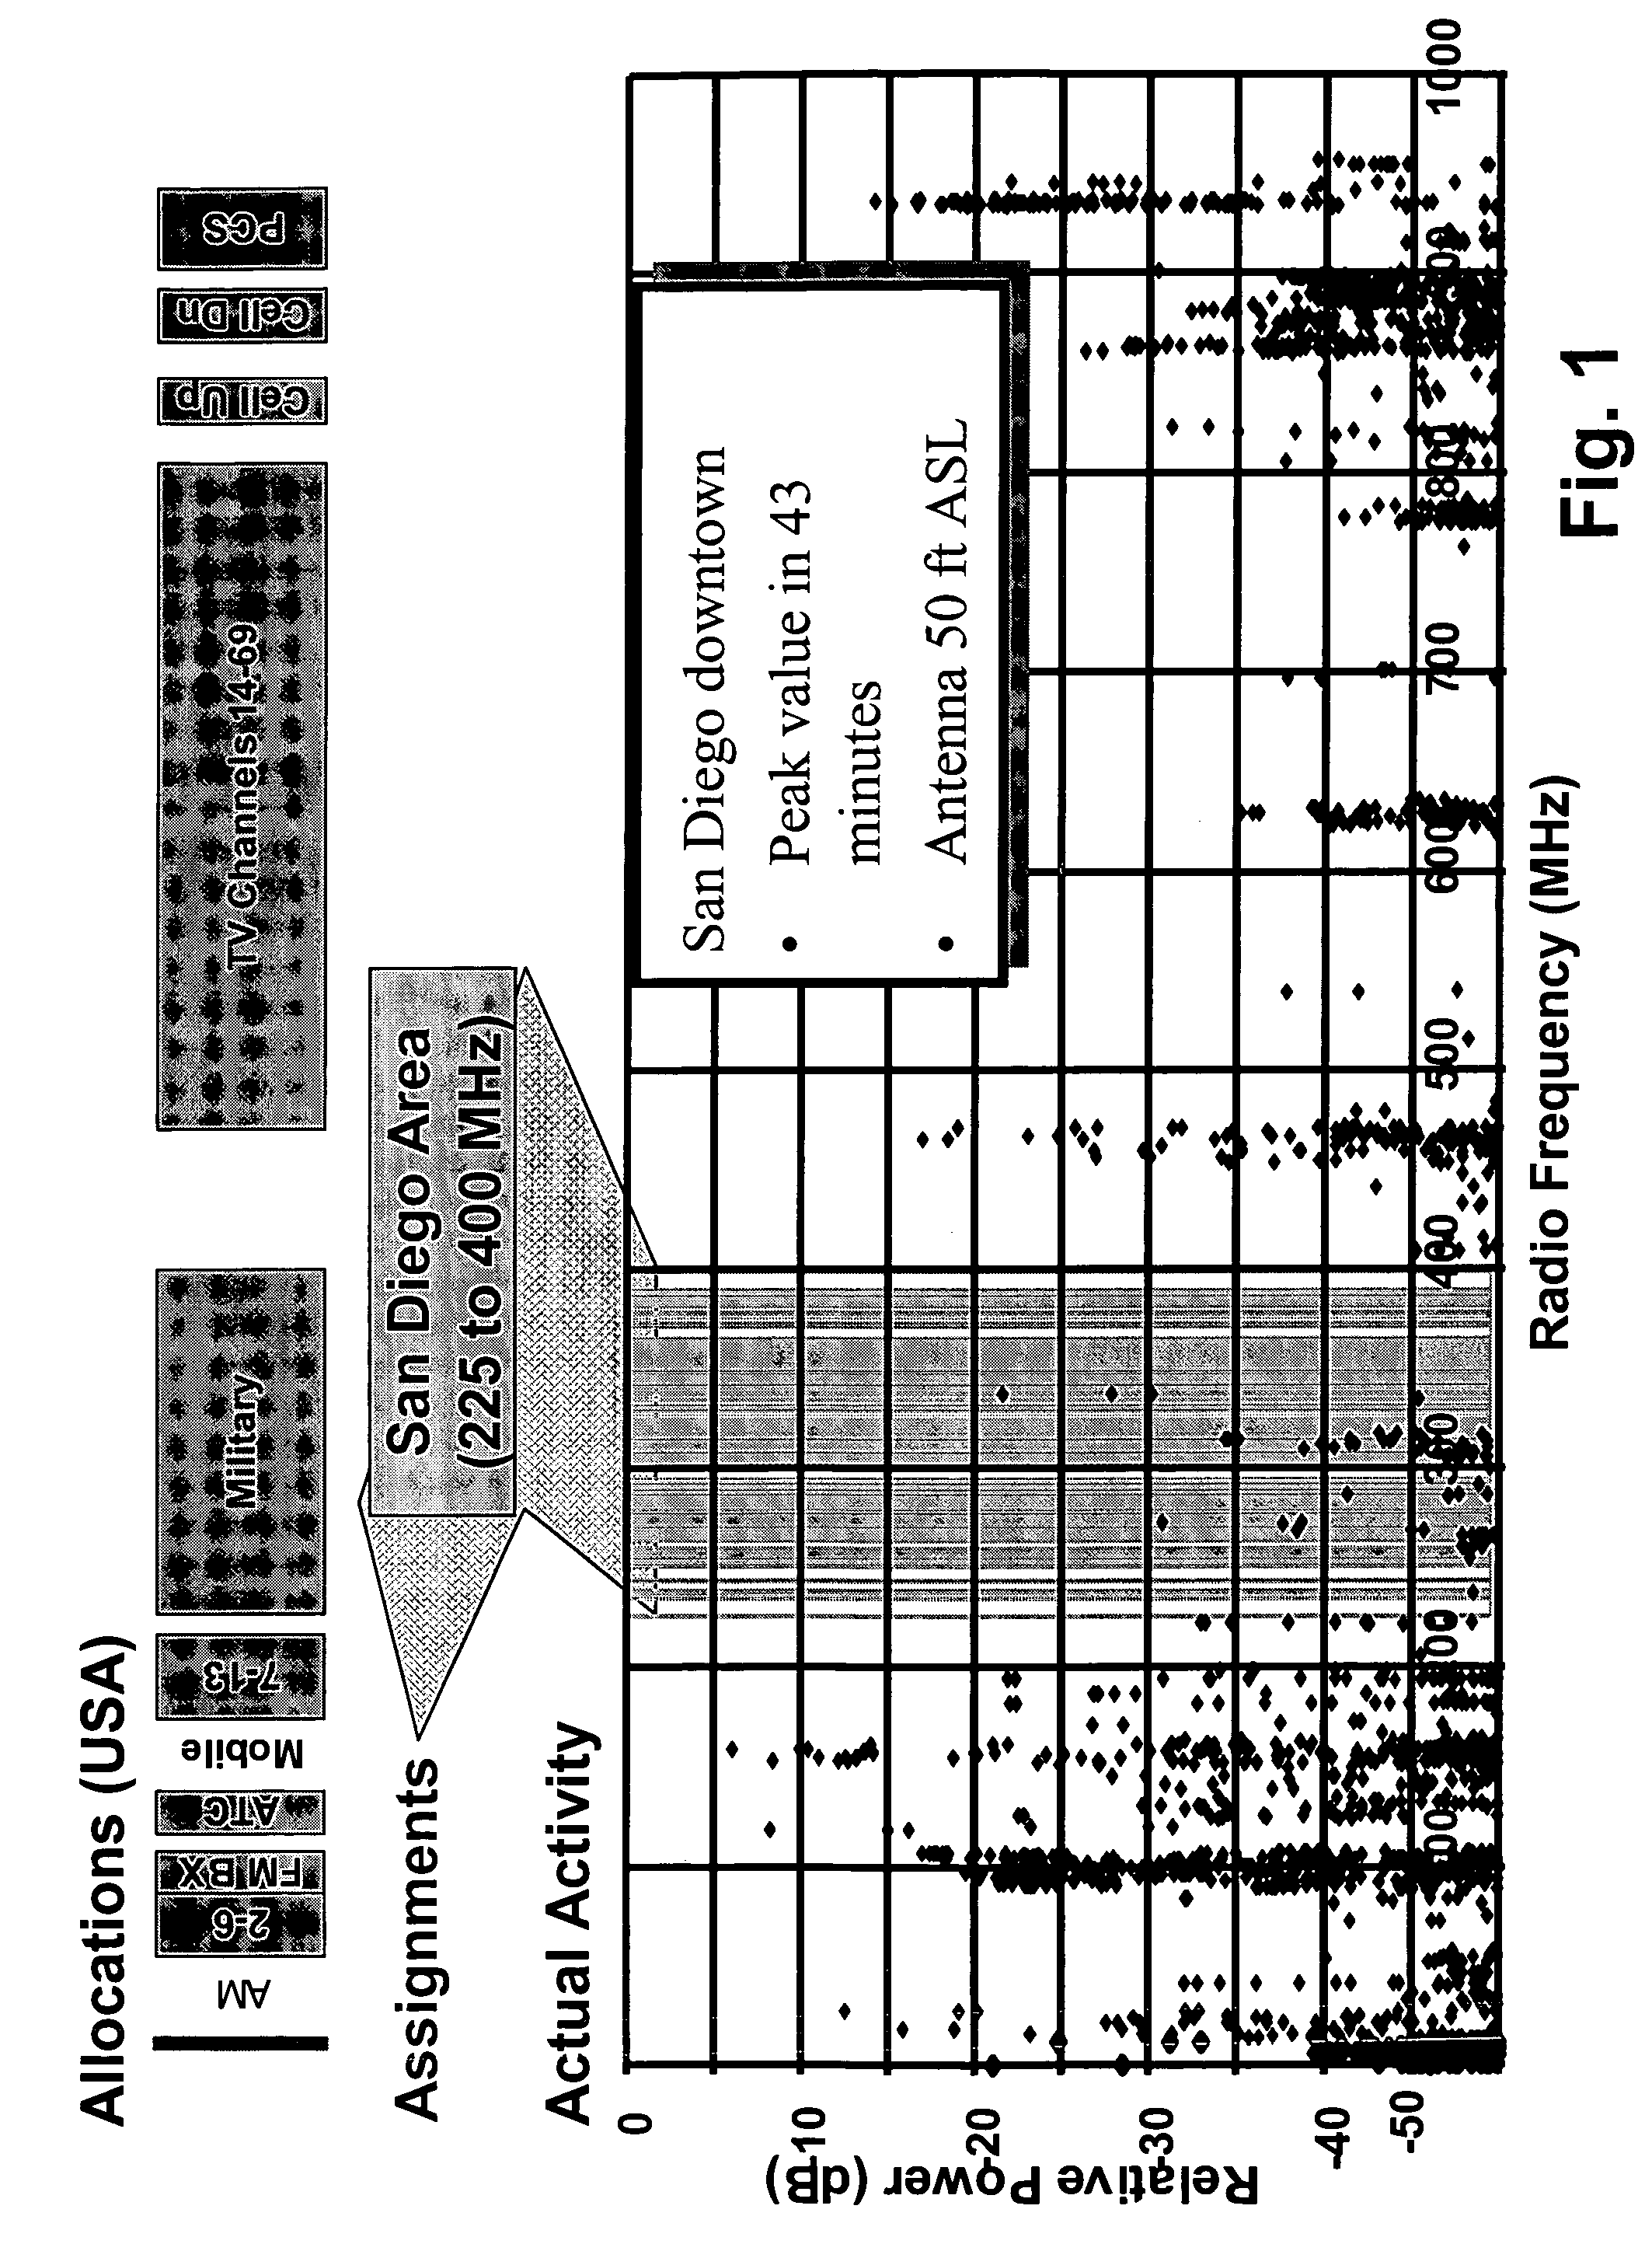 Method and system for energy reclamation and reuse